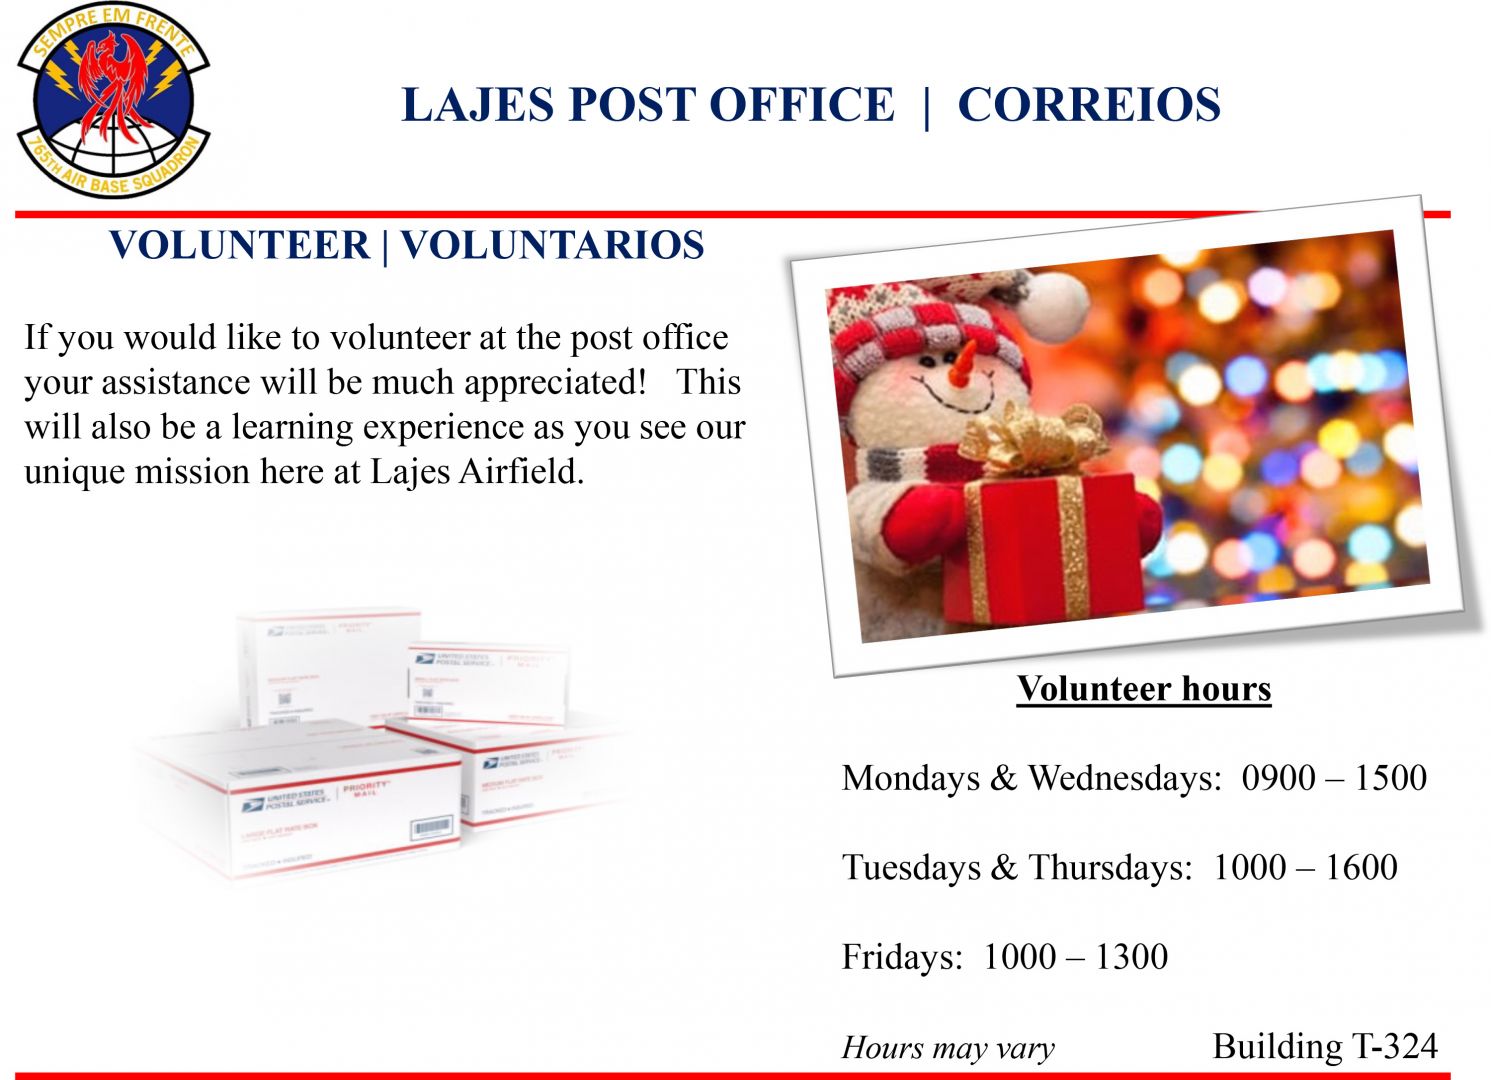 Volunteer at the Post Office